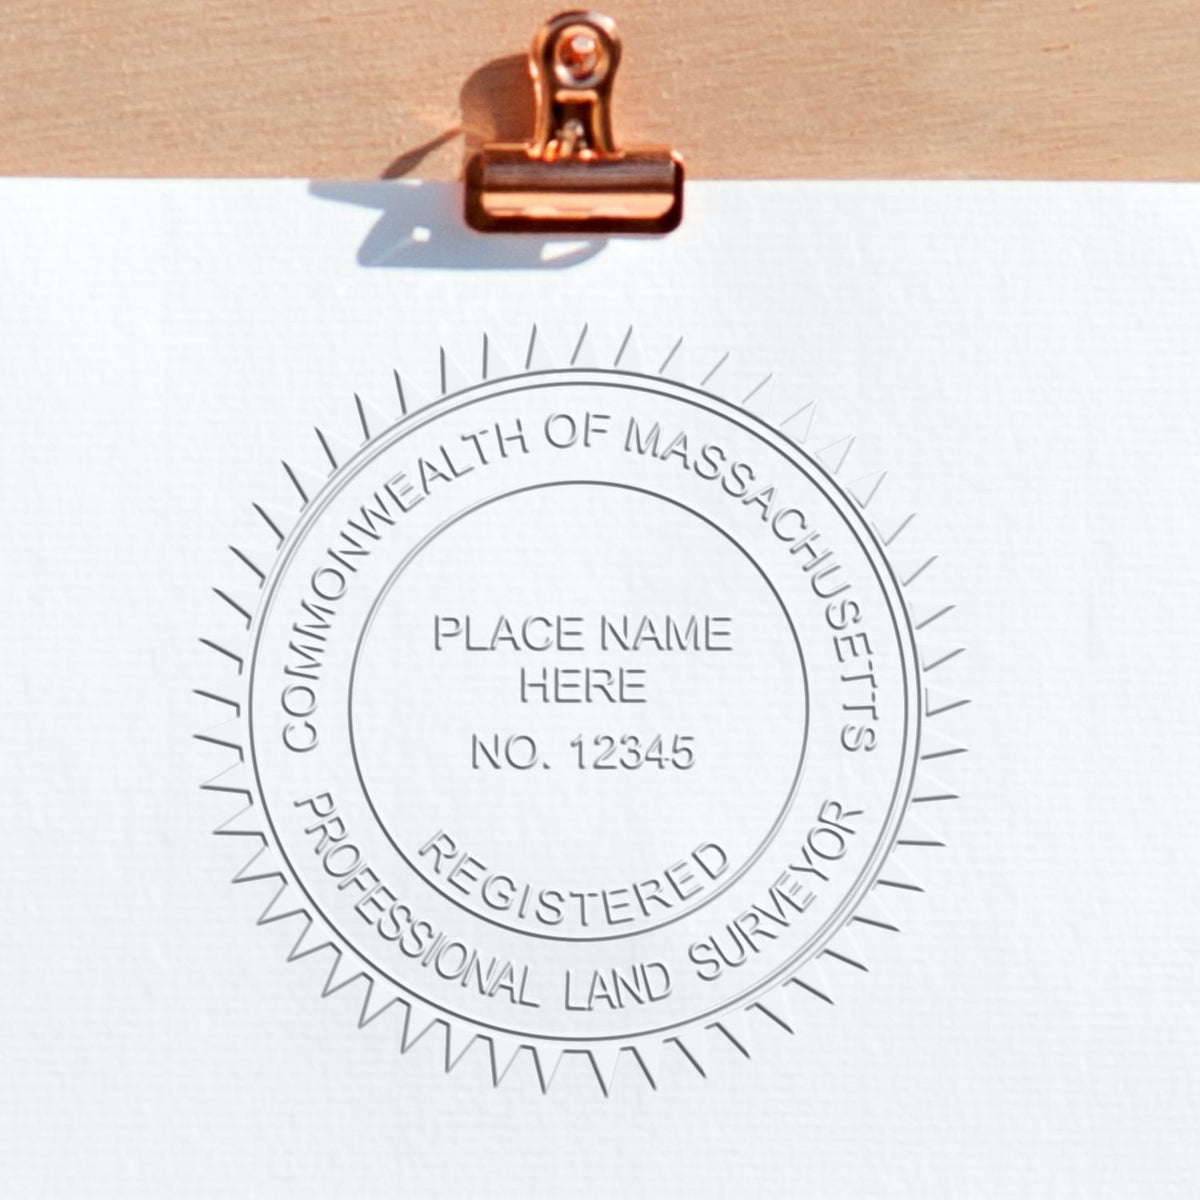 The Gift Massachusetts Land Surveyor Seal stamp impression comes to life with a crisp, detailed image stamped on paper - showcasing true professional quality.